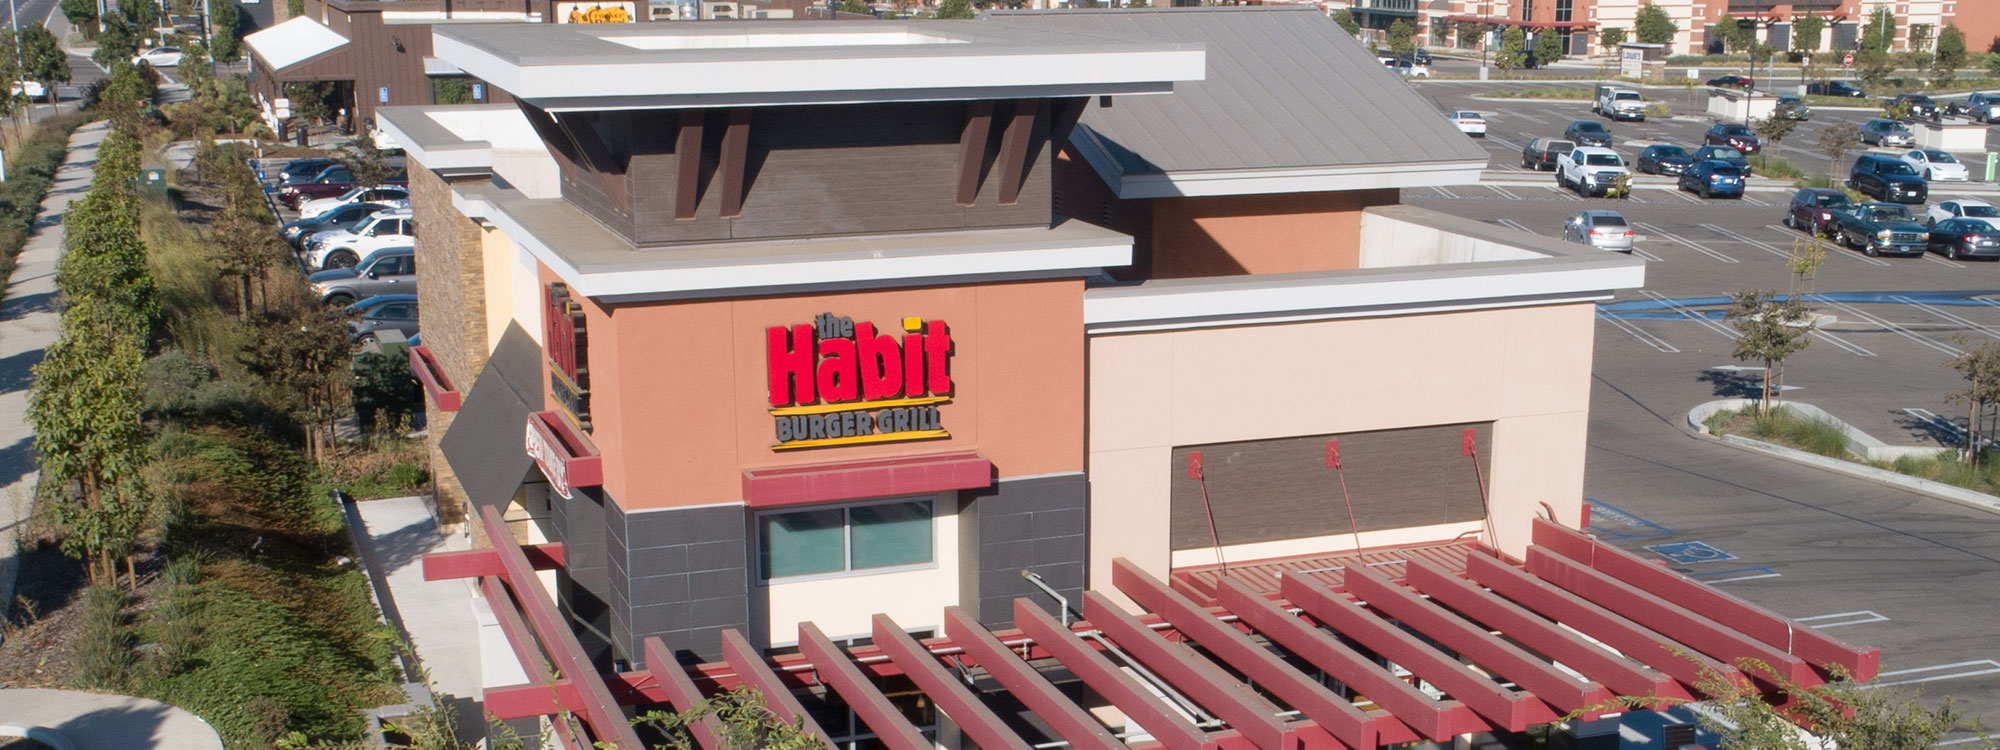 Fast Food Contractor and Builder - The Habit Burger - JW Design & Construction